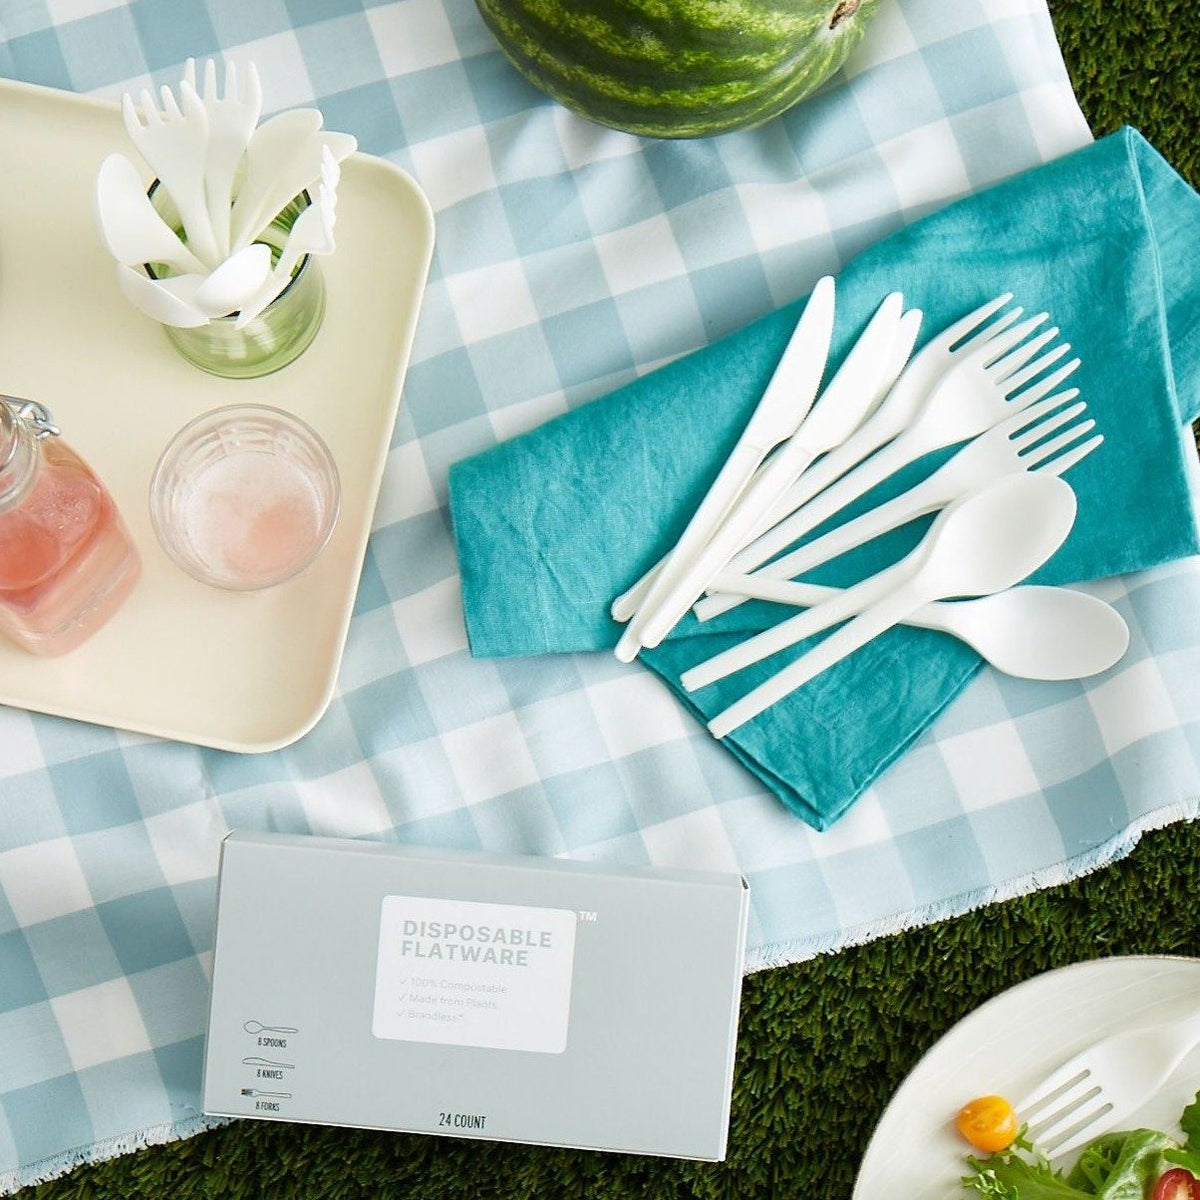 Lifestyle photo of disposable flatware laid out on a napkin at a lawn picnic.